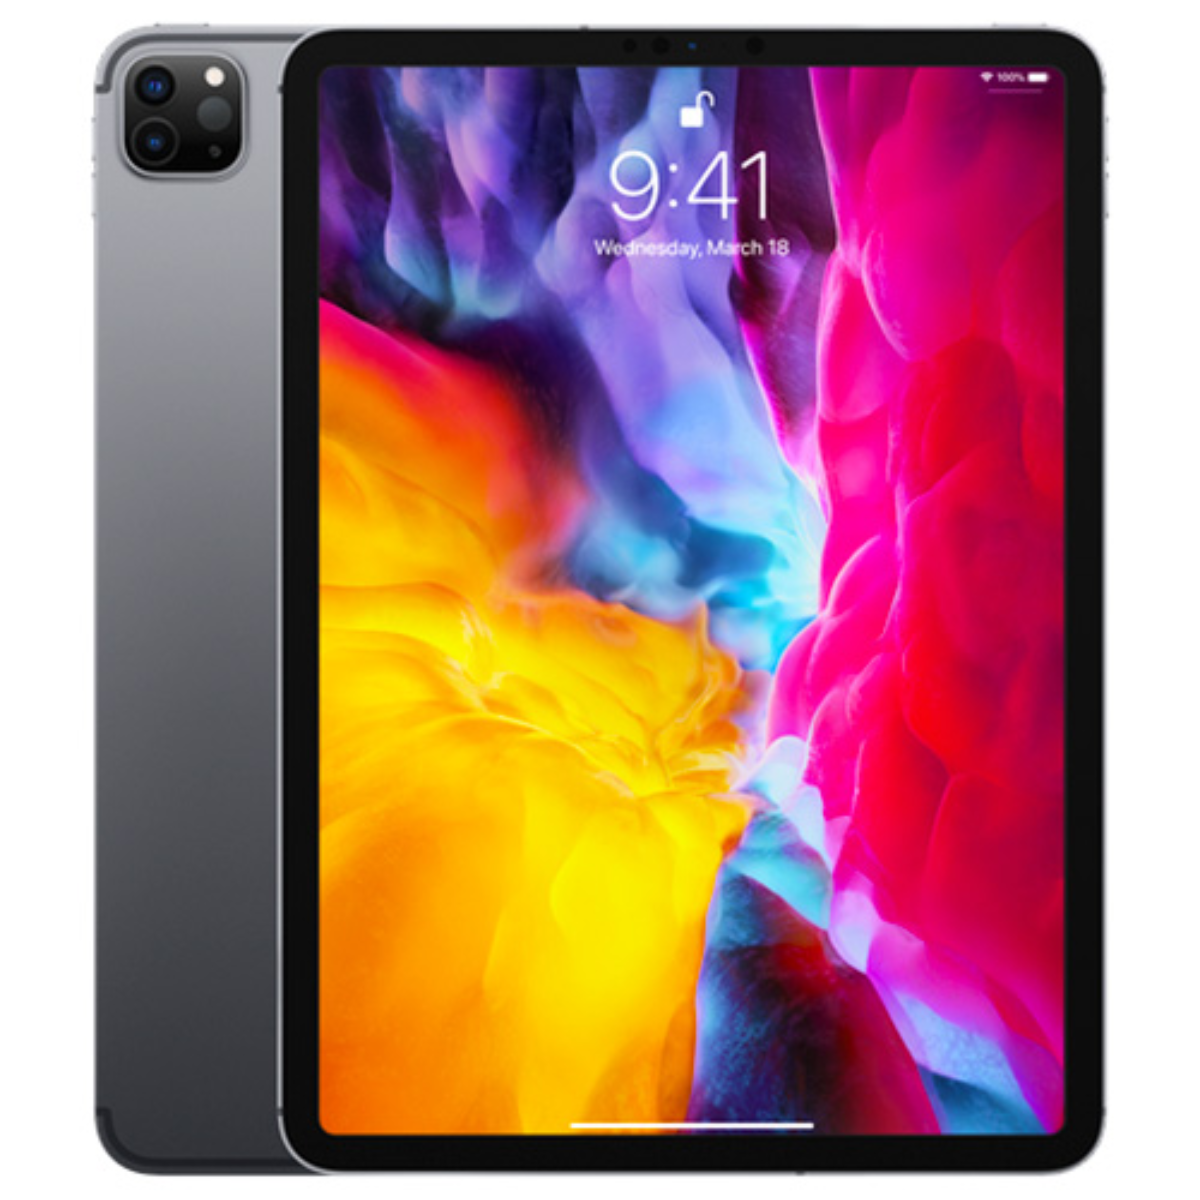 Rumor First Ipad With Oled Display Coming In 2023 